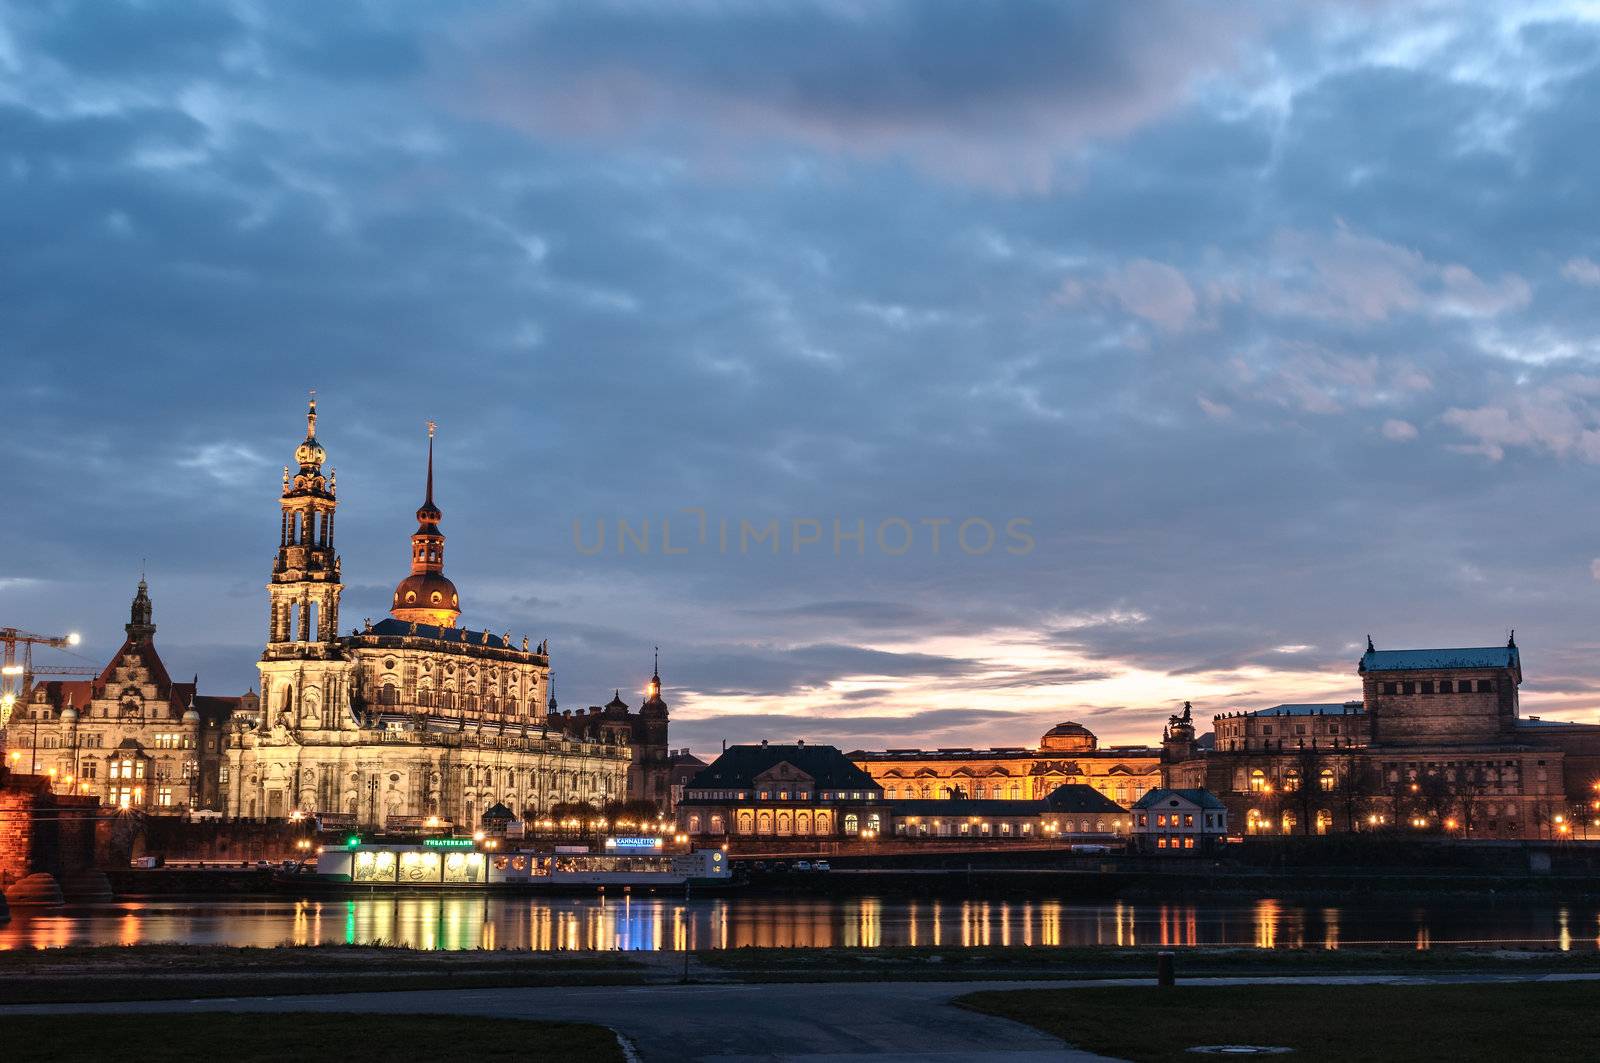 View of the Altstadt (old town) with the Hofkirche and the Semperoper at sunset. Picture taken from the other side of the Elbe river.